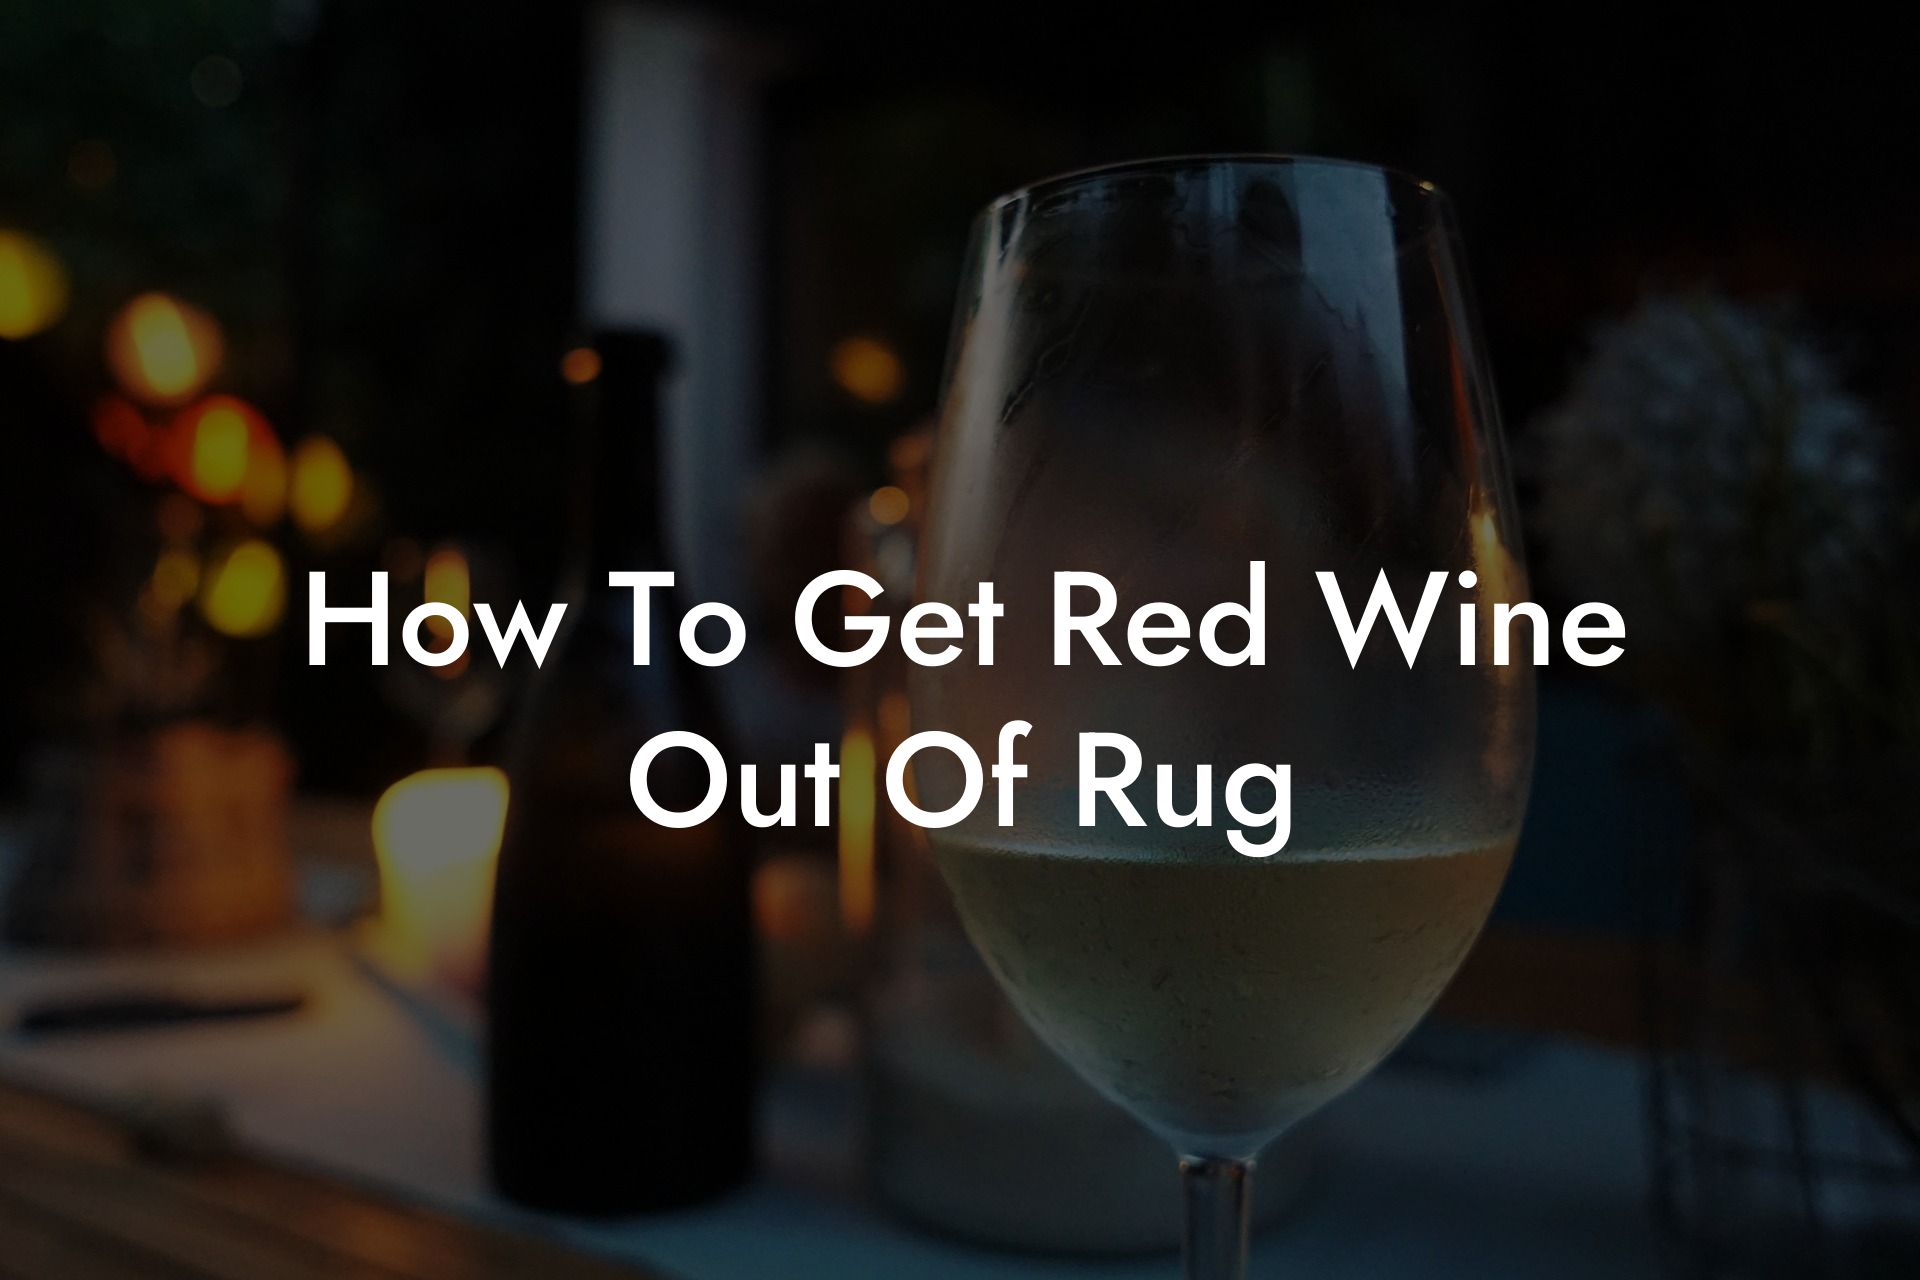 How To Get Red Wine Out Of Rug